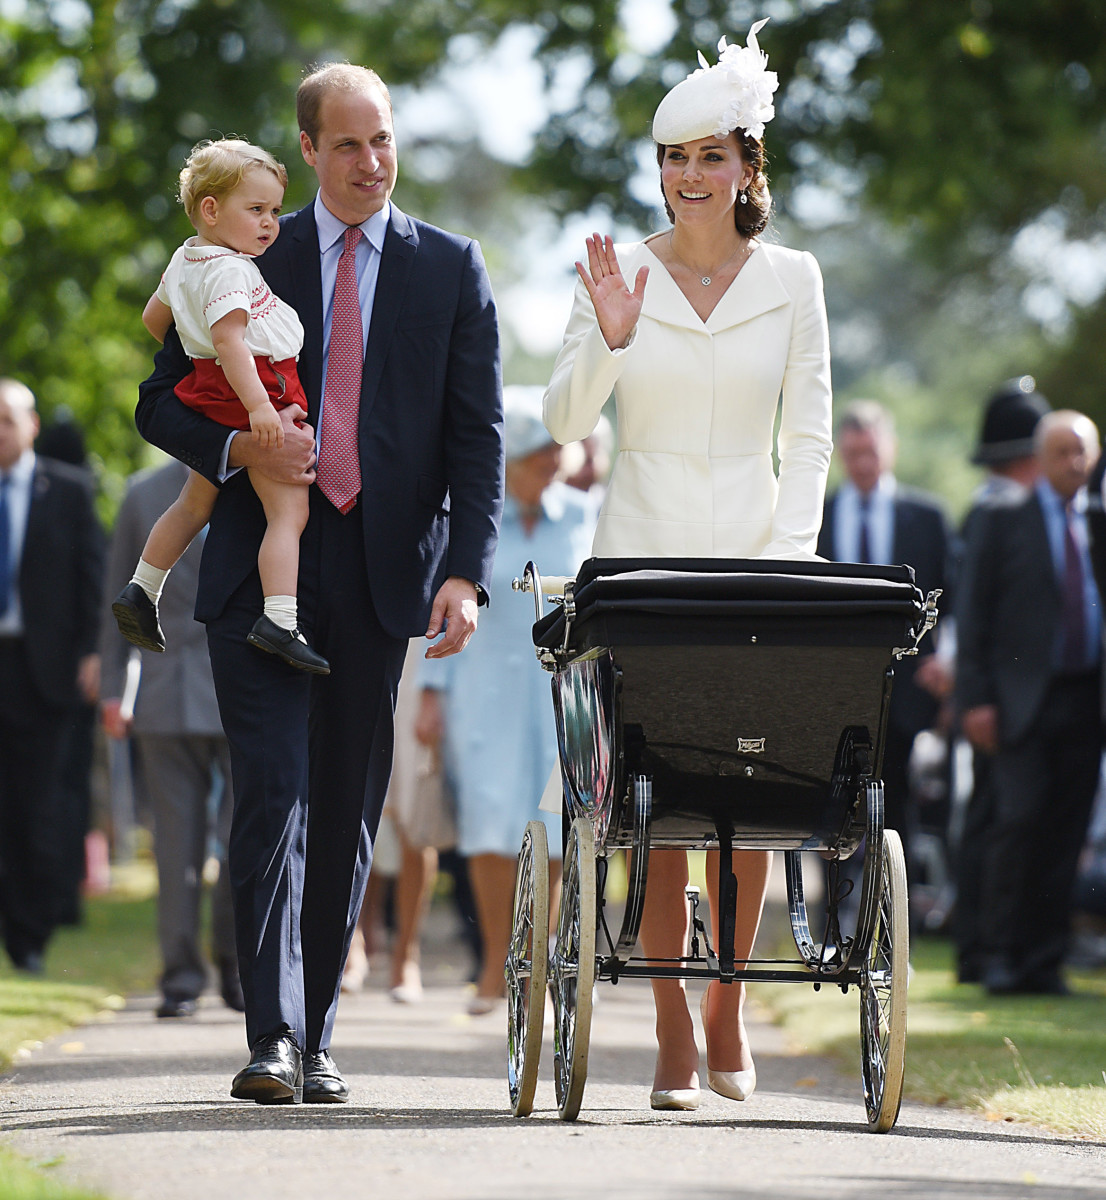 A local family takes a Sunday morning stroll to church. Photo: Chris Jackson/Getty Images